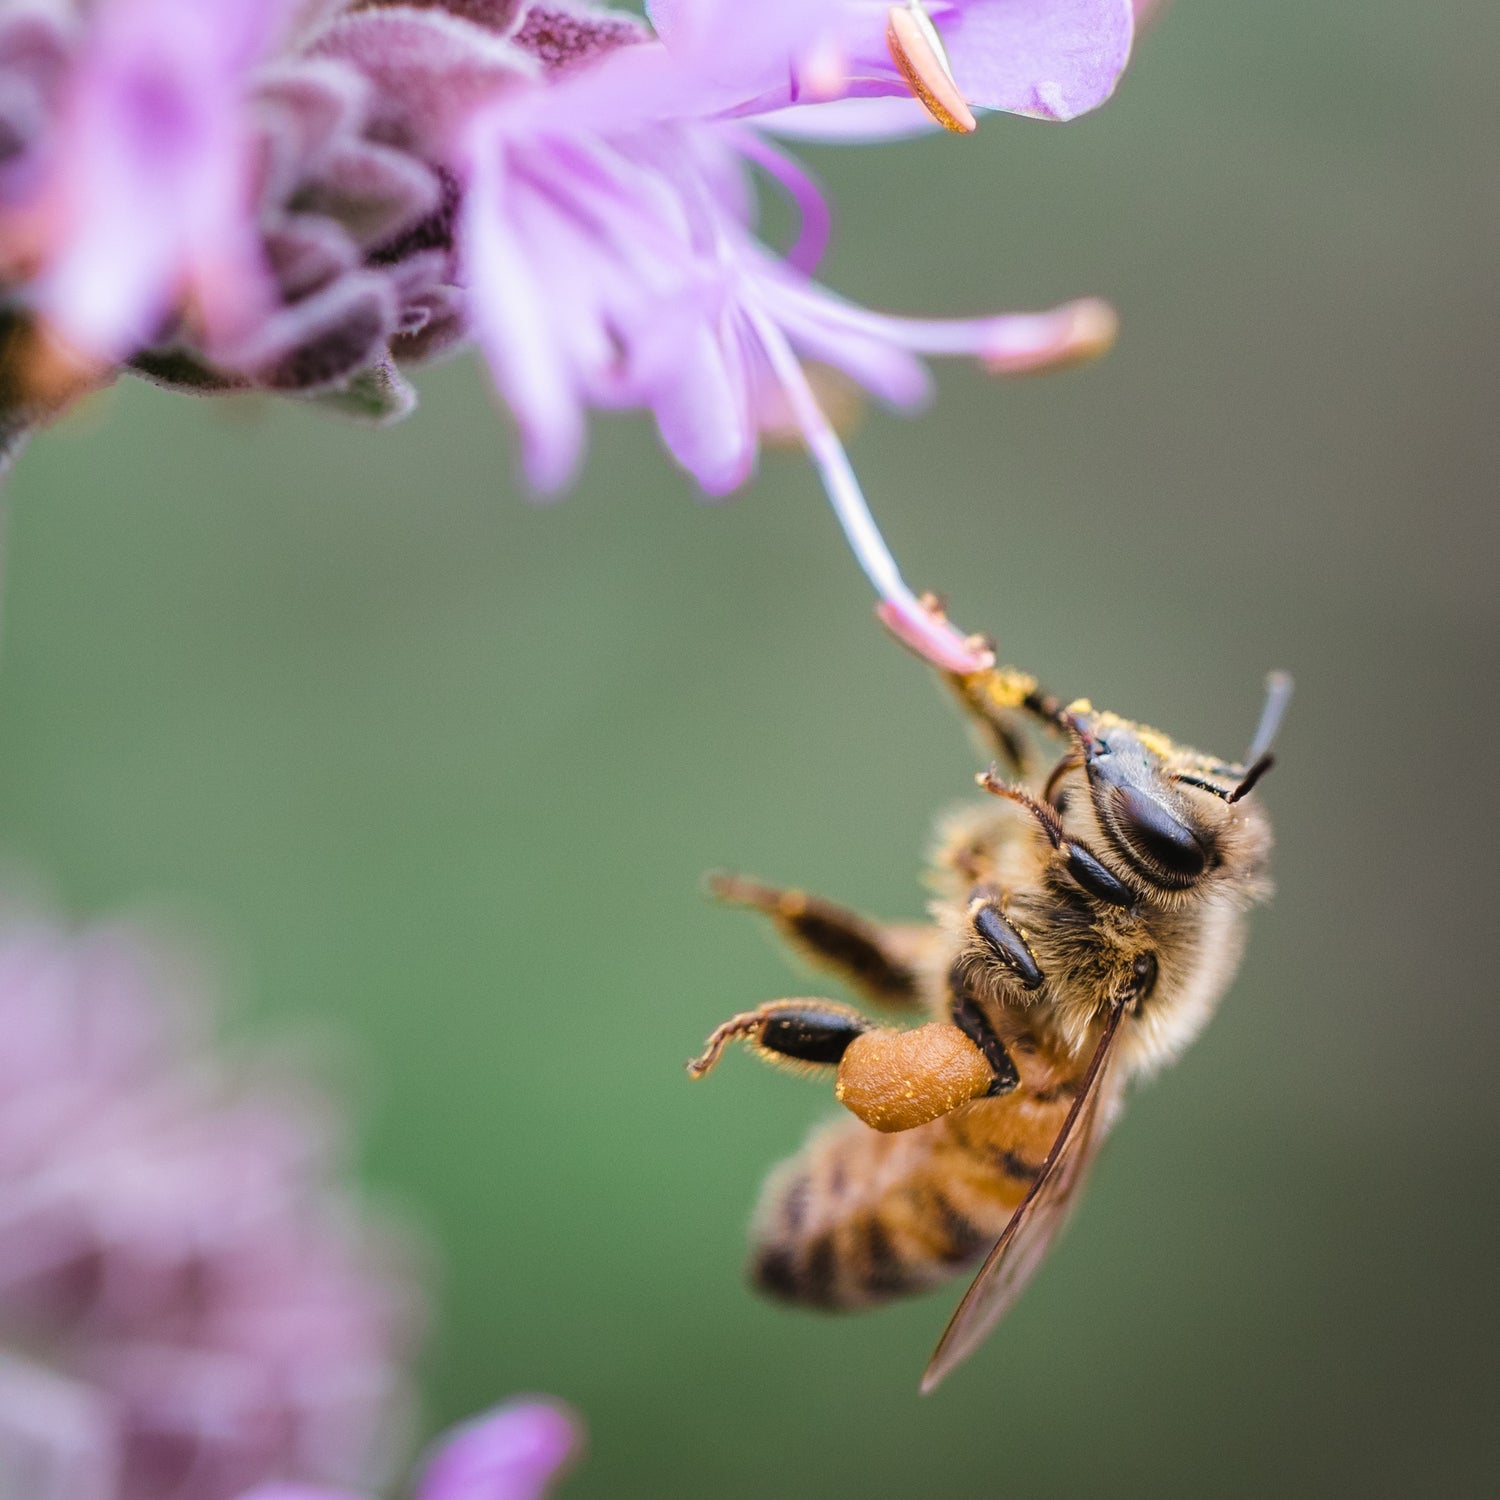 honeybee drinking nectar from a purple flower - getpinkfit donated 10% to The Honeybee Conservancy save the bees efforts